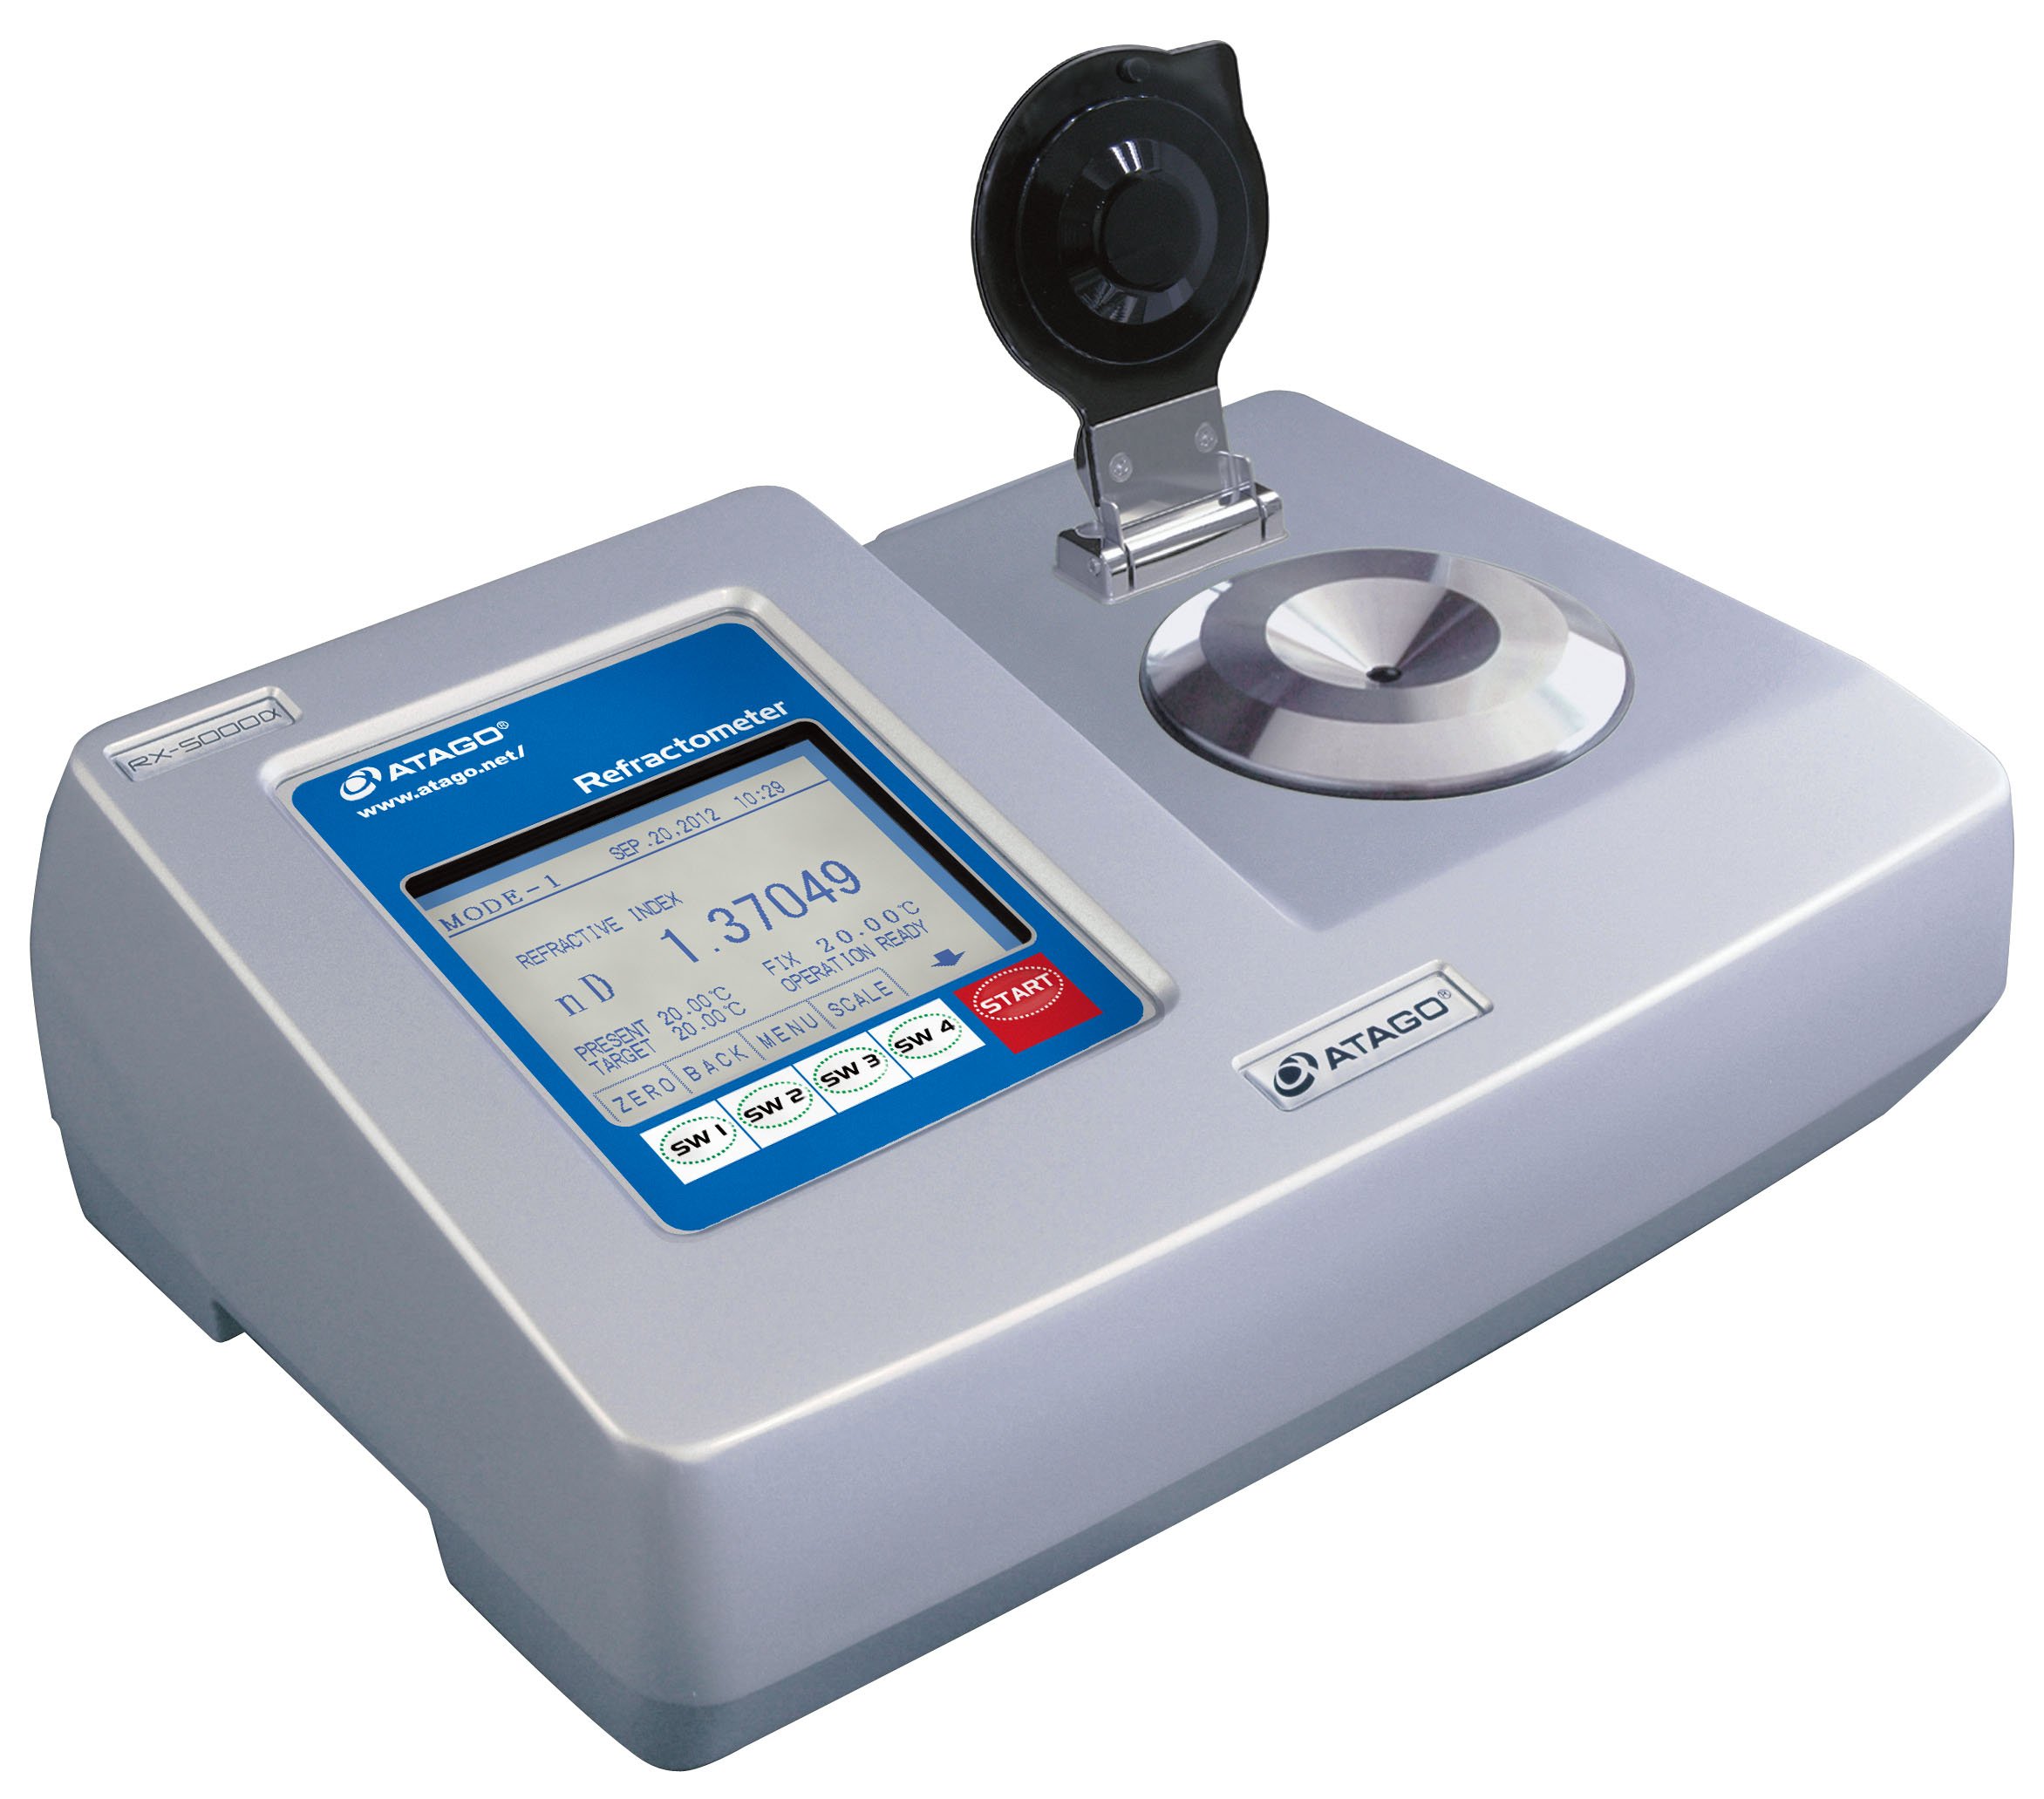 Atago 3261 RX-5000a (alpha) Automatic Digital Bench-Top Refractometers, Refractive index (nD) : 1.32700 to 1.58000, Brix : 0.000 to 100.00% Measurement Range